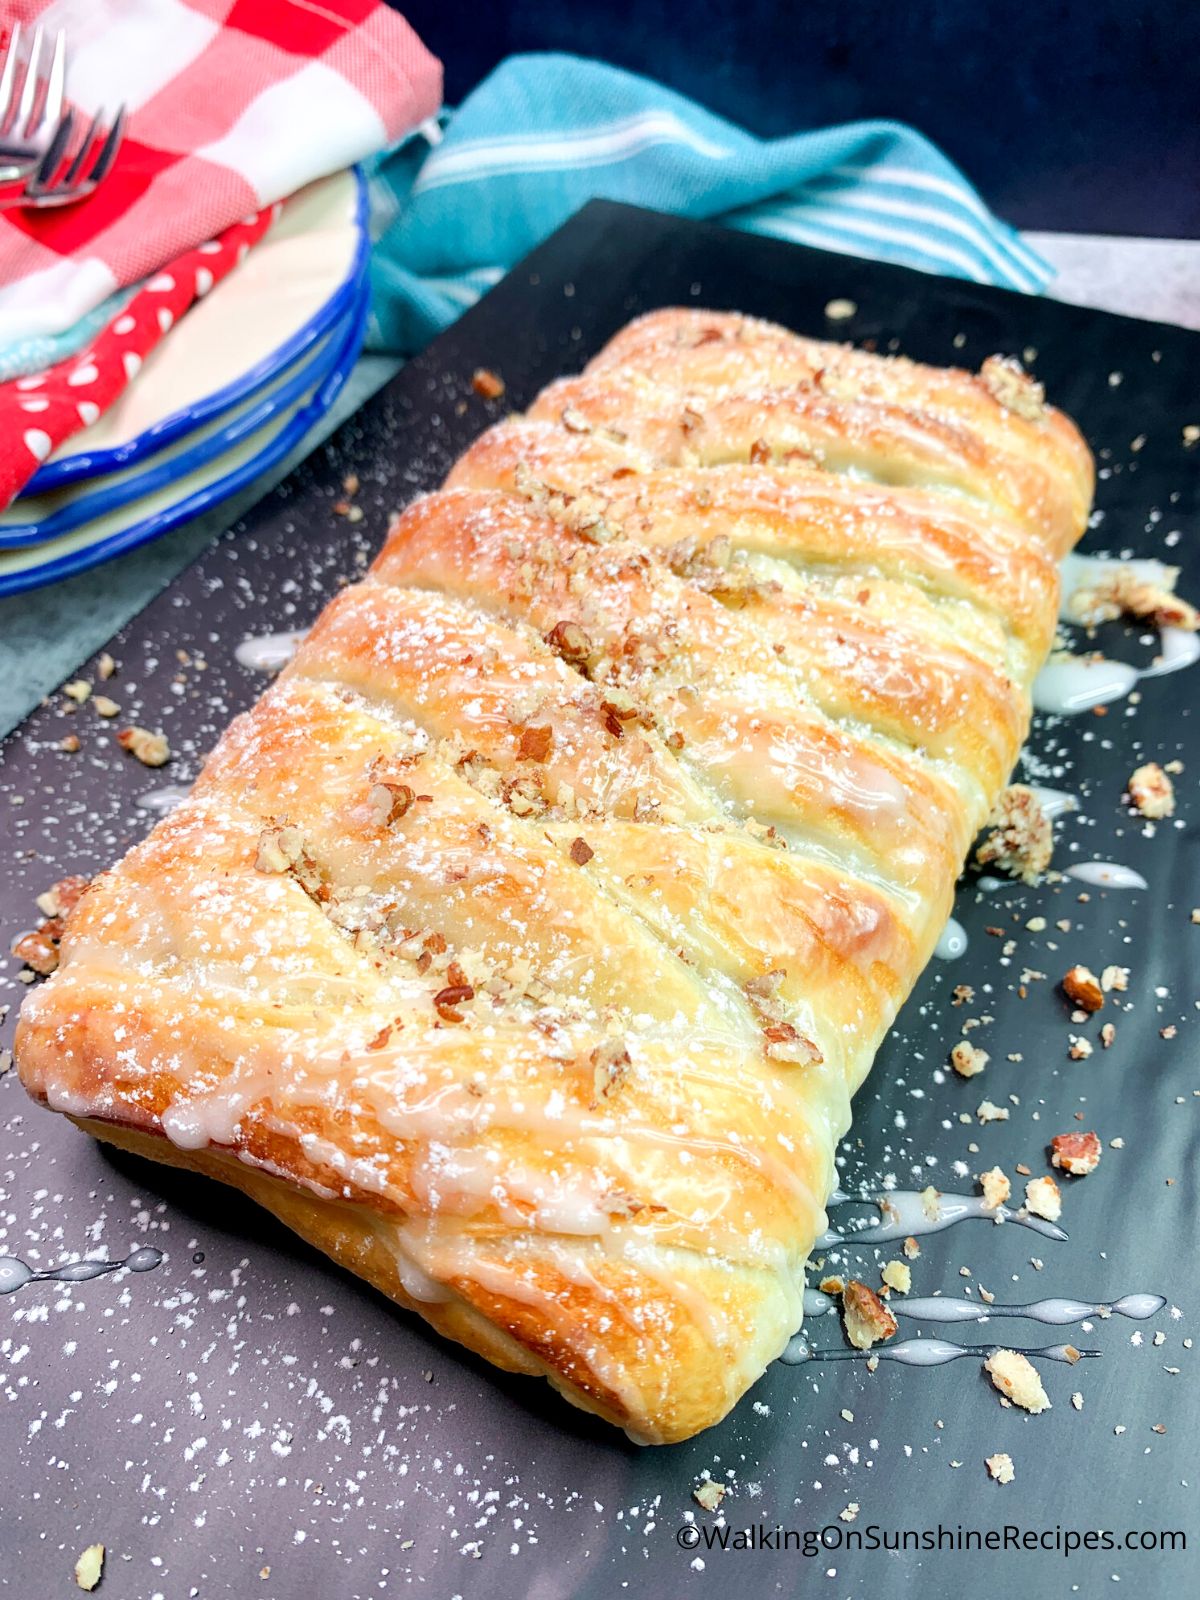 Chocolate puff pastry on serving tray with glaze and chopped pecans.